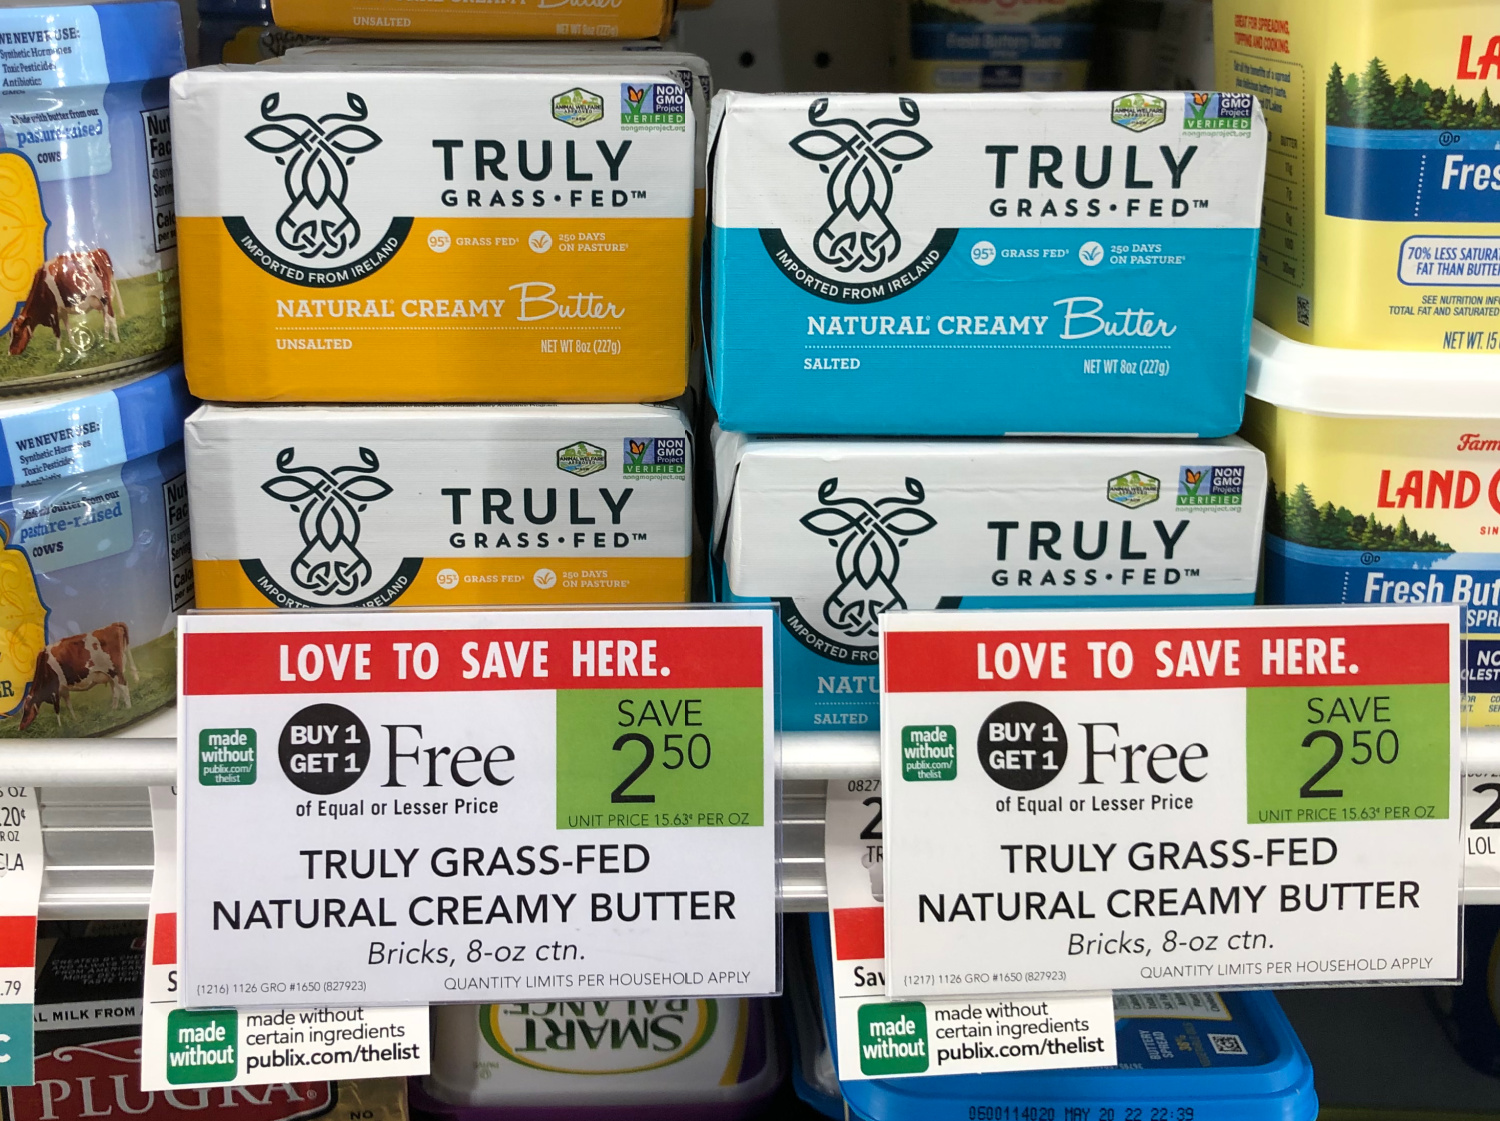 Truly Grass-Fed Natural Creamy Butter Just 25¢ After Coupon At Publix on I Heart Publix